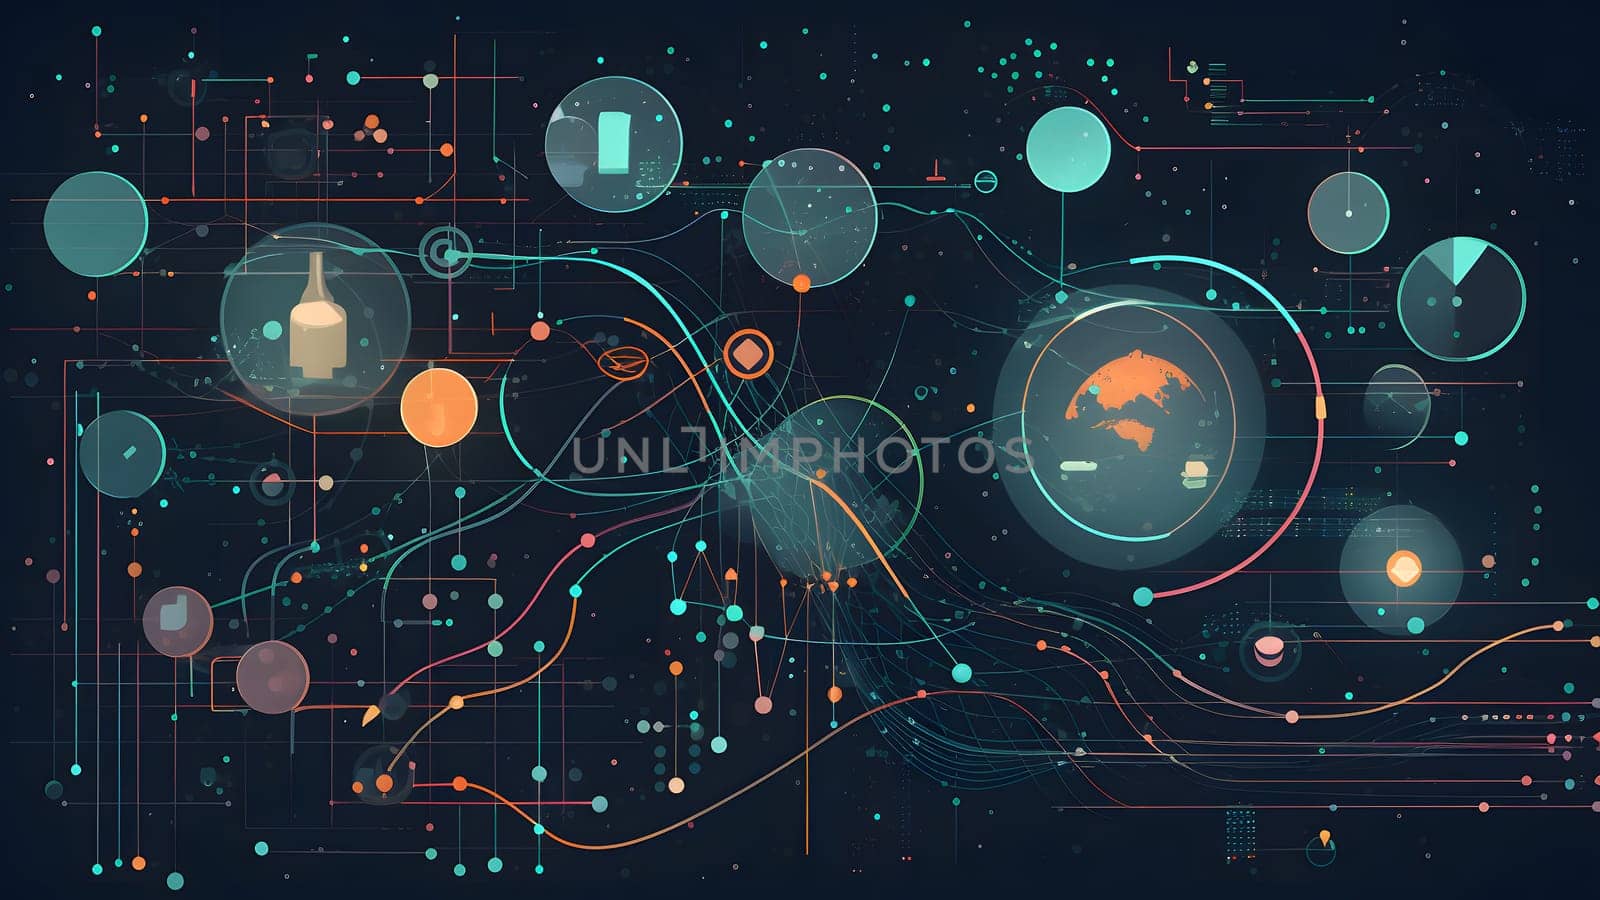 data science-inspired wallpaper depicting the visual and modern process of data collection, cleaning, analysis, and visualization. Neural network generated in May 2023. Not based on any actual person, scene or pattern.